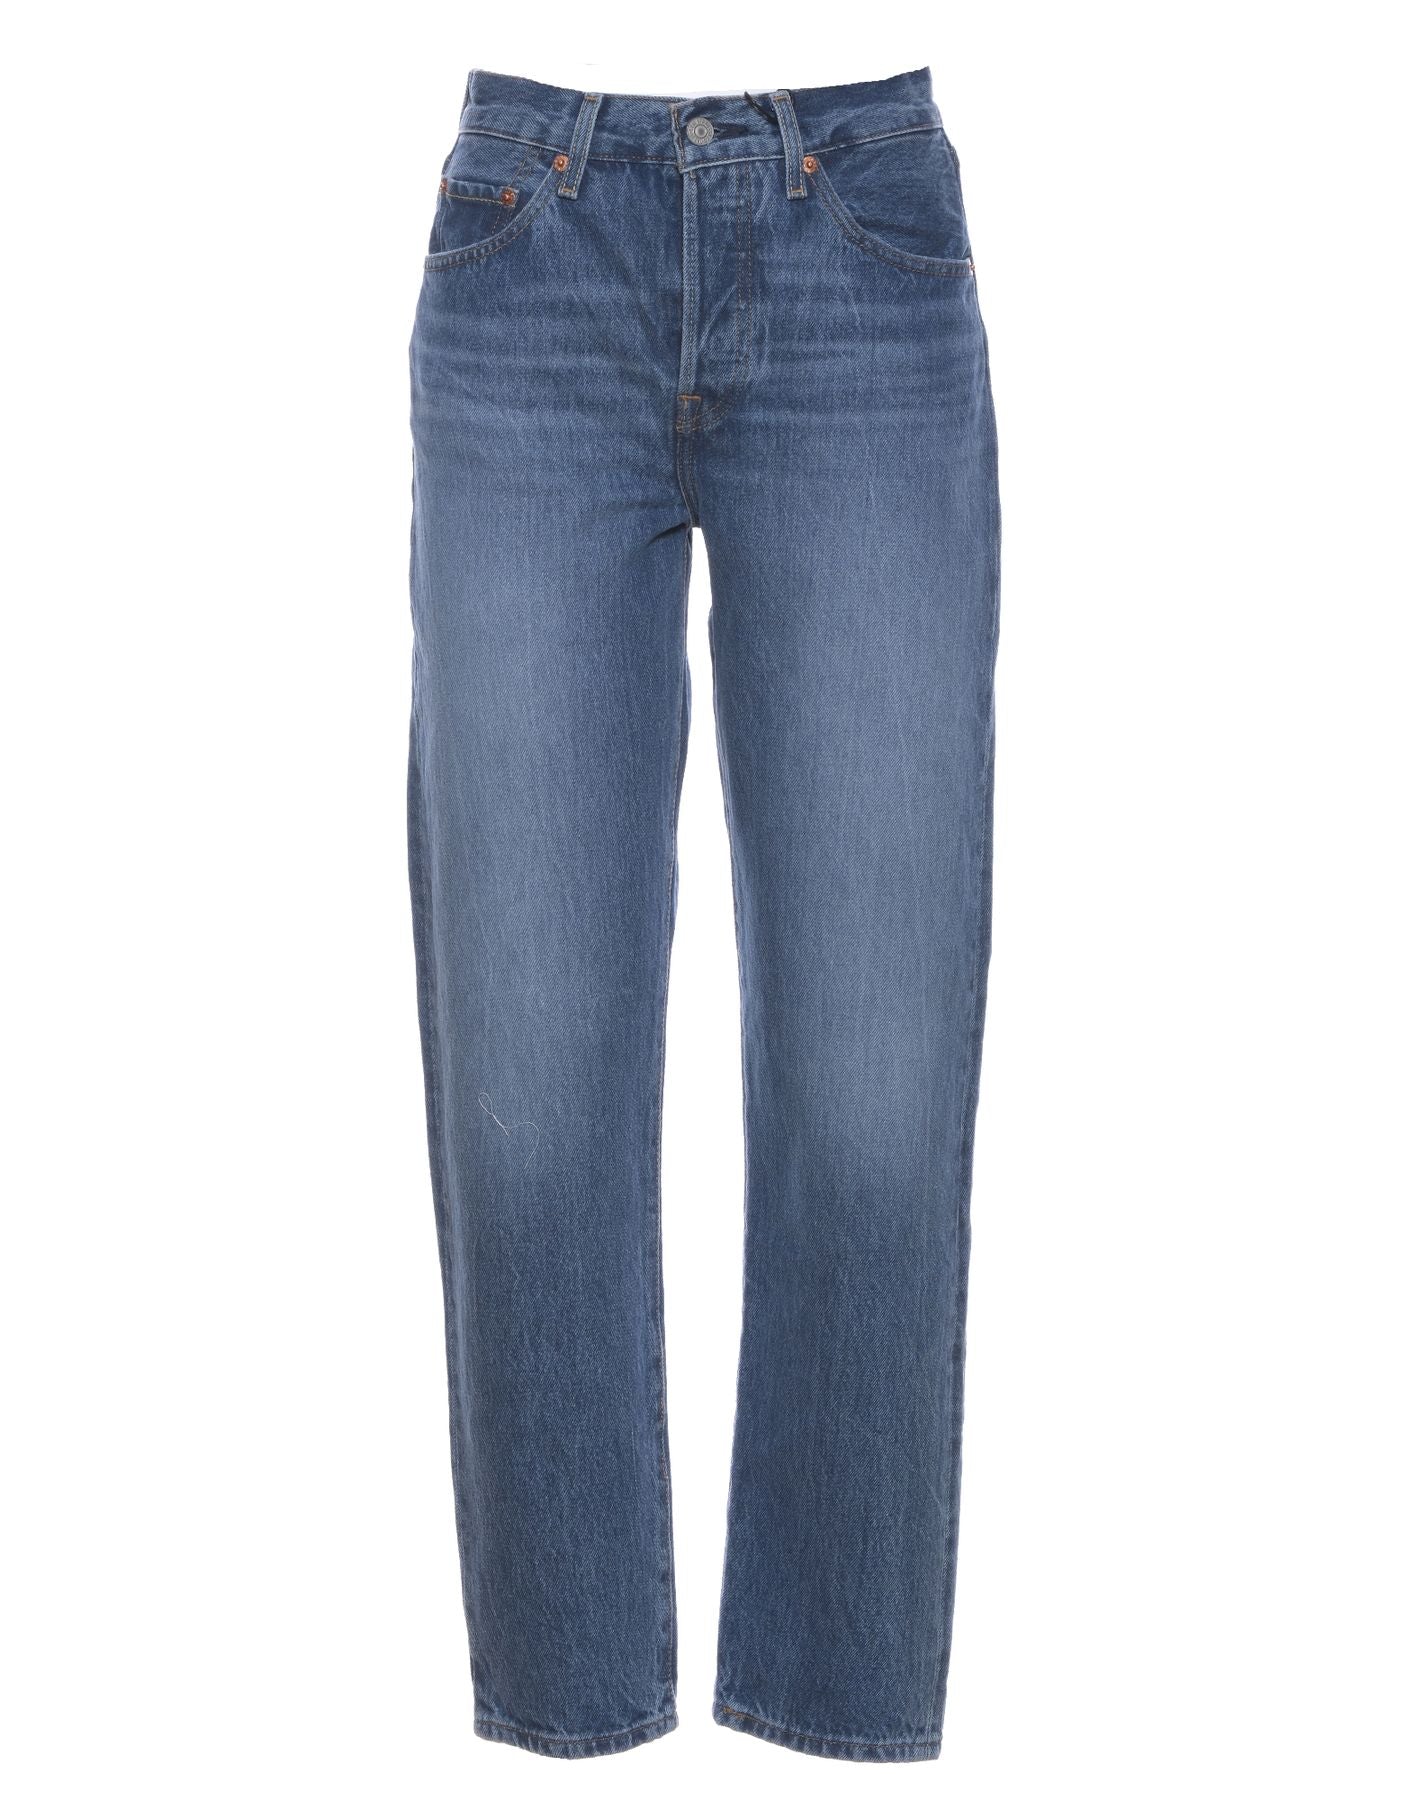 Jeans for woman A46990009 Levi's